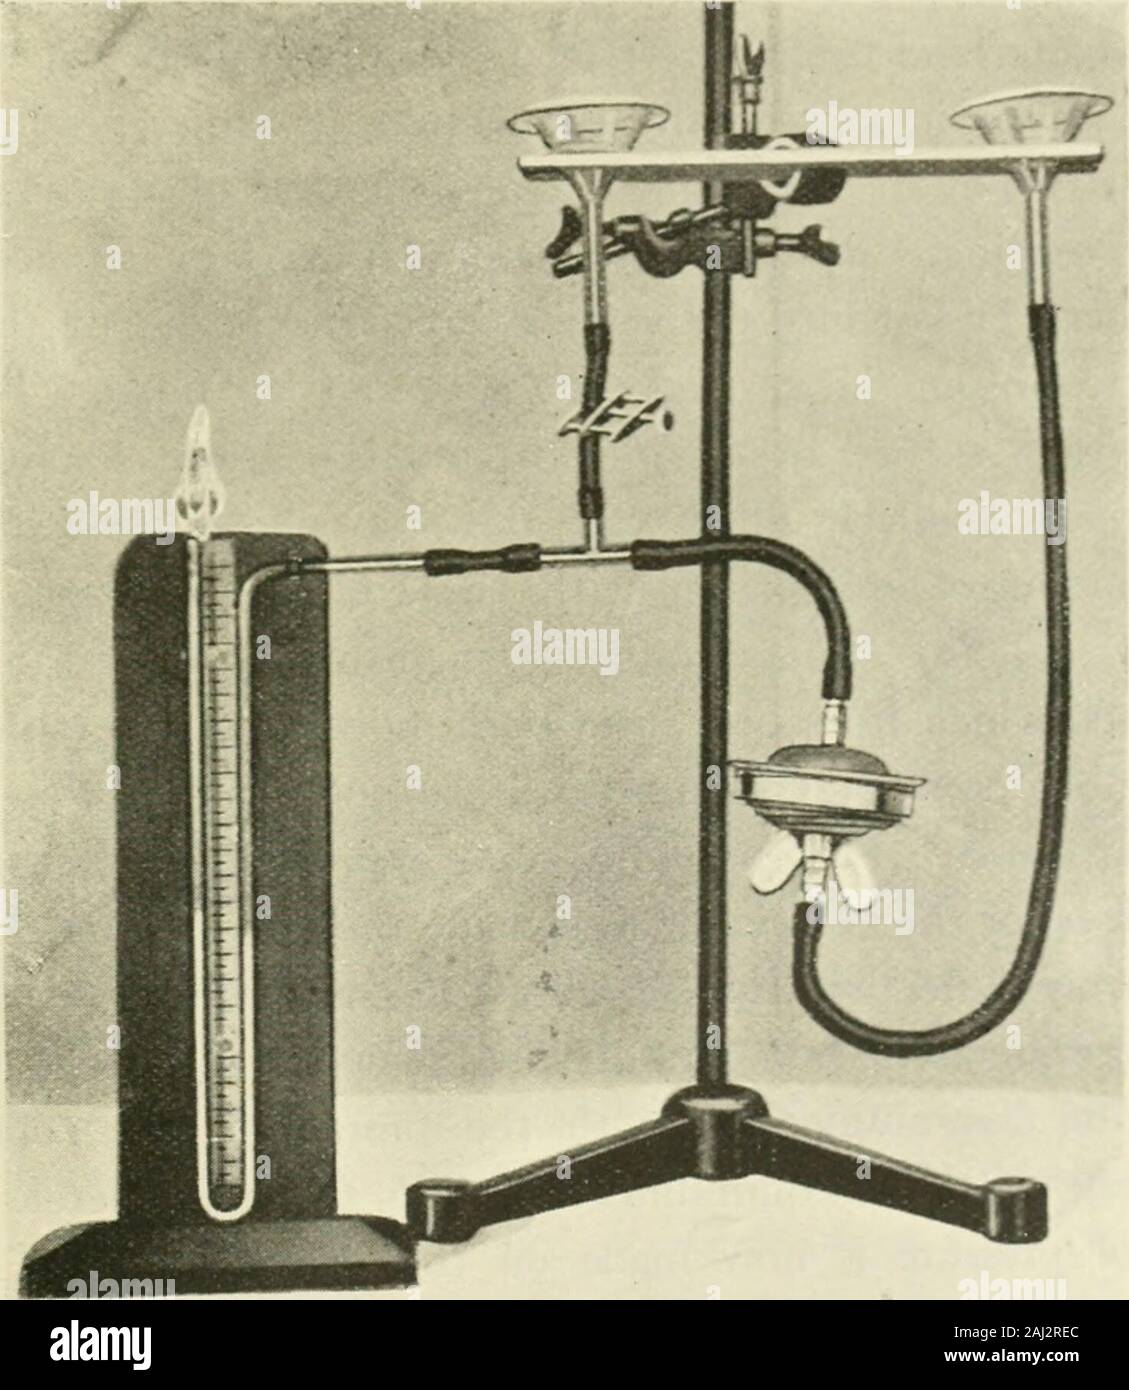 The Biochemical journal, 1907 . variably causesleakage. The osmometer is screwed together by means of a male screwon the lower casing and a female screw on a circular joining piece ofthick metal possessing a flange, which fits against a flange on the uppercase as shown in the drawing. The thumb hold on the lower caseenables the whole to be tightly screwed together. The capacity of each chamber was about 20 c.c, the diameter5 cm., and the depth i cm. ; so that a large surface for diffusionand rapid equalization of crystalloids was offered, relatively, to thevolumes of the chambers. In fitting u Stock Photo